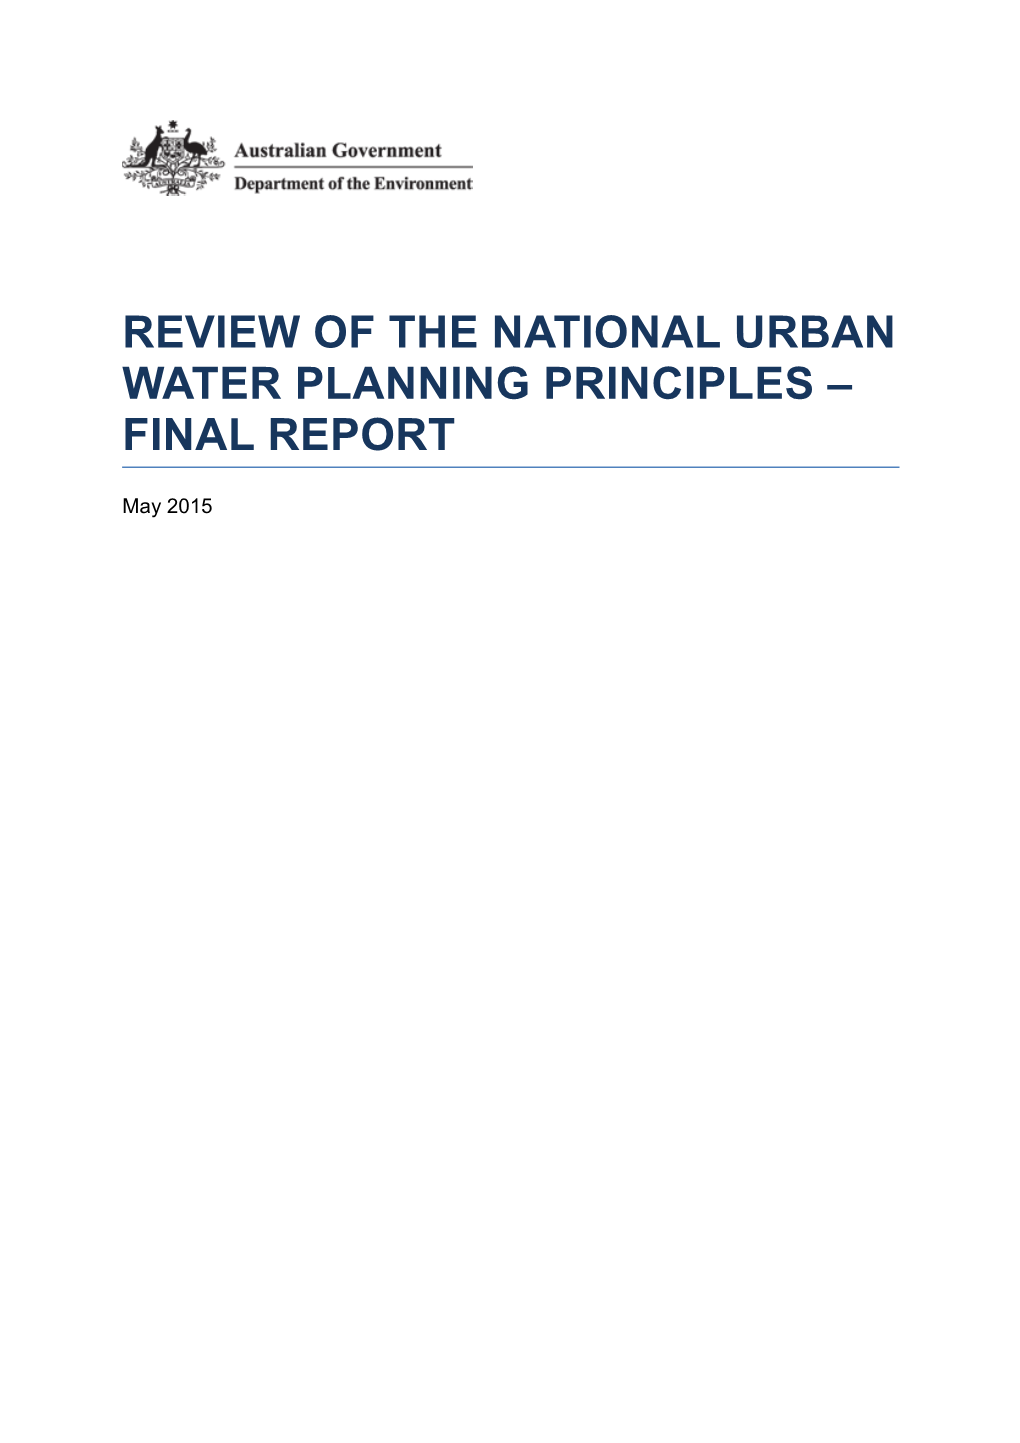 2014 Review of the National Urban Water Planning Principles